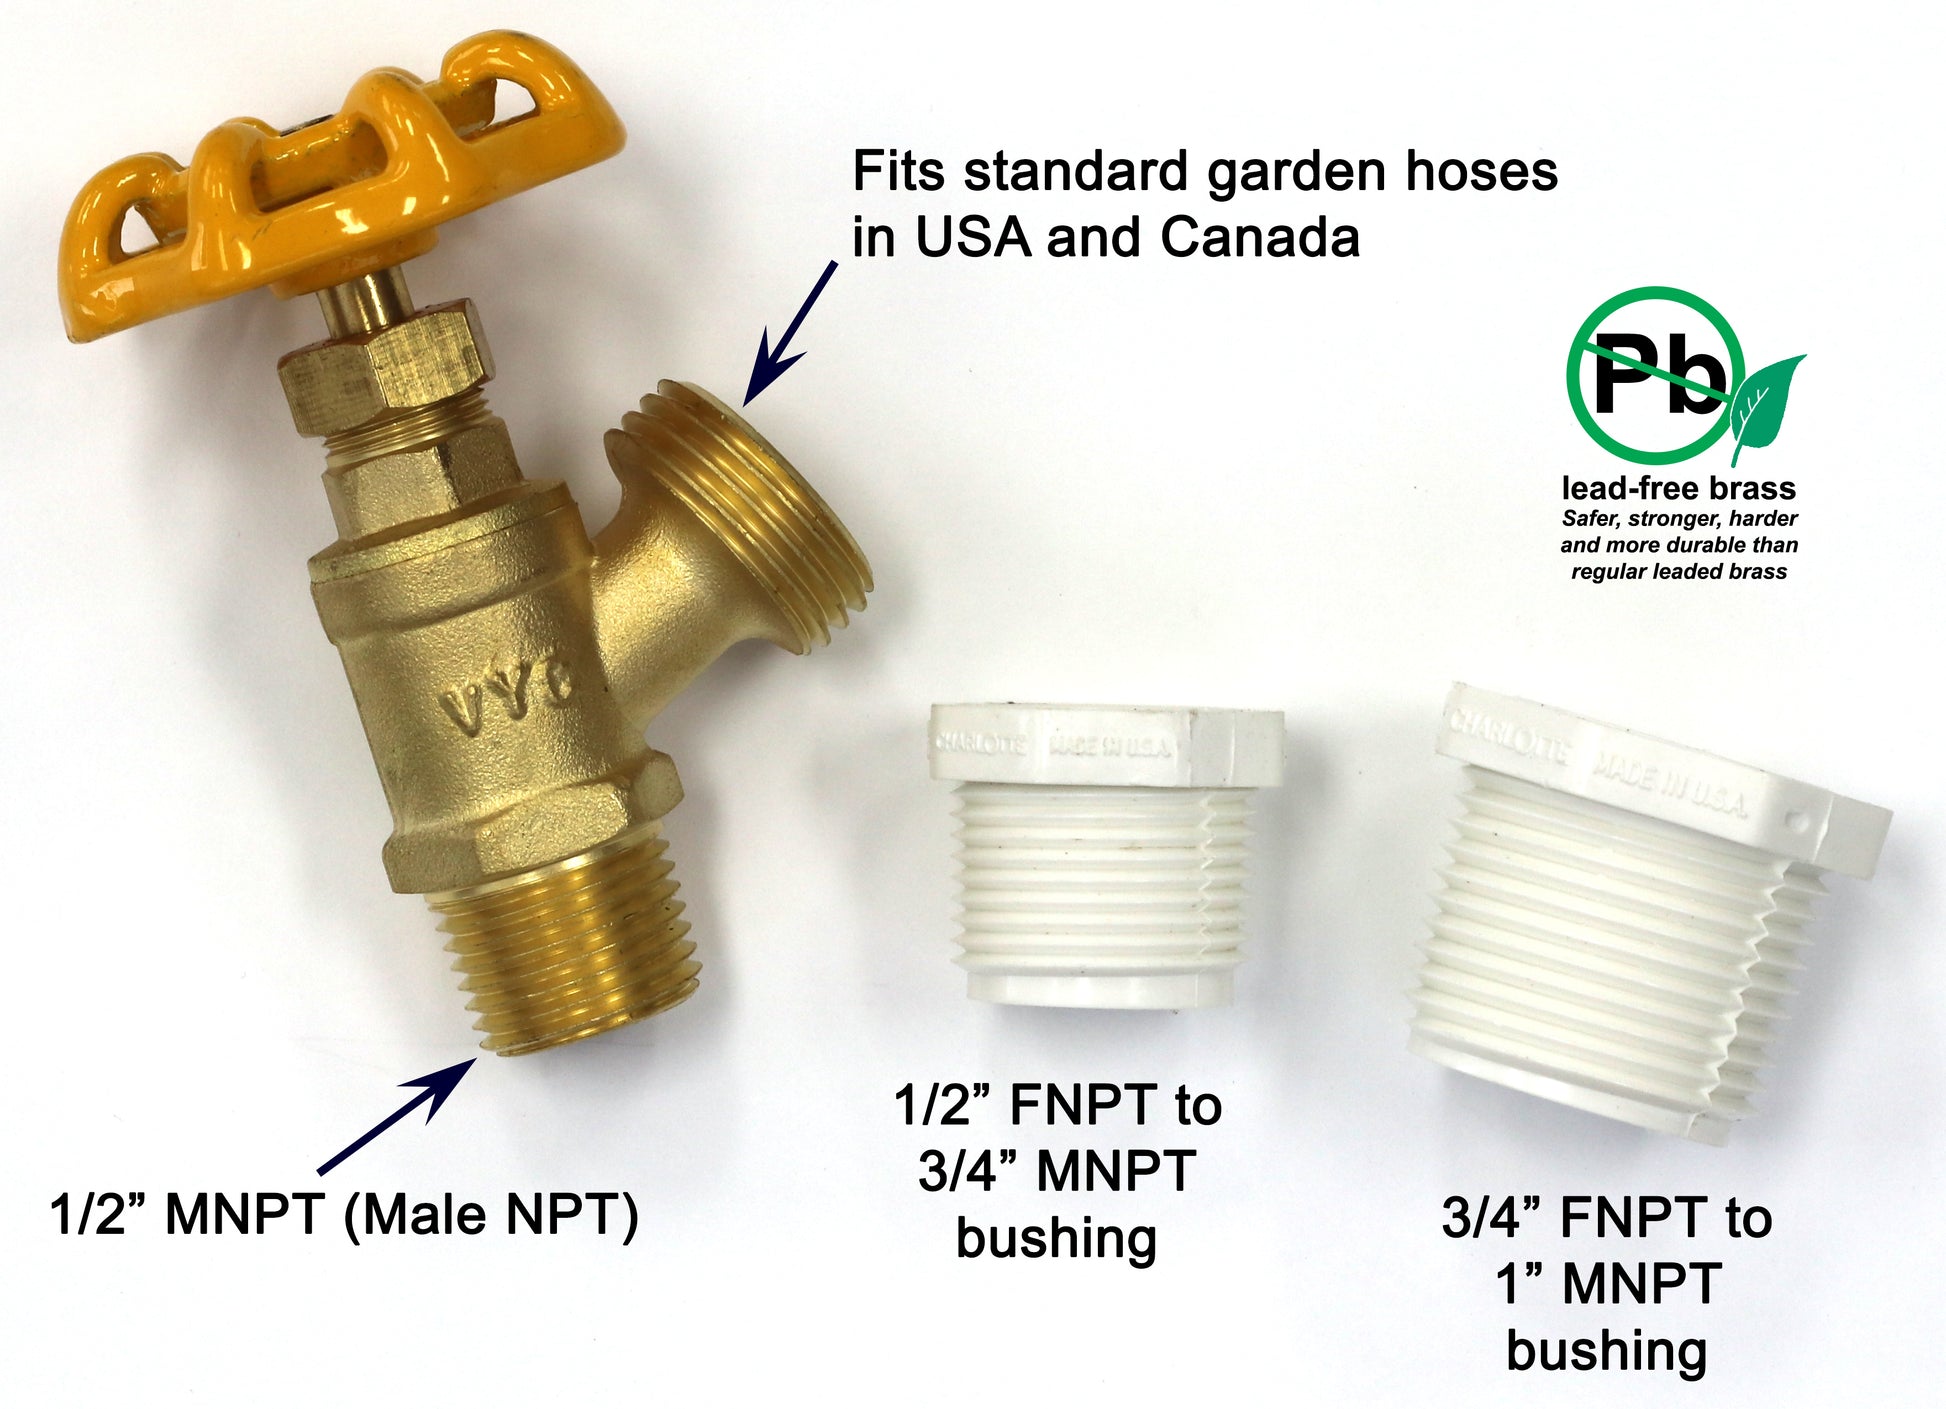 outdoorfaucet - What type of water pipe and bushing is this called